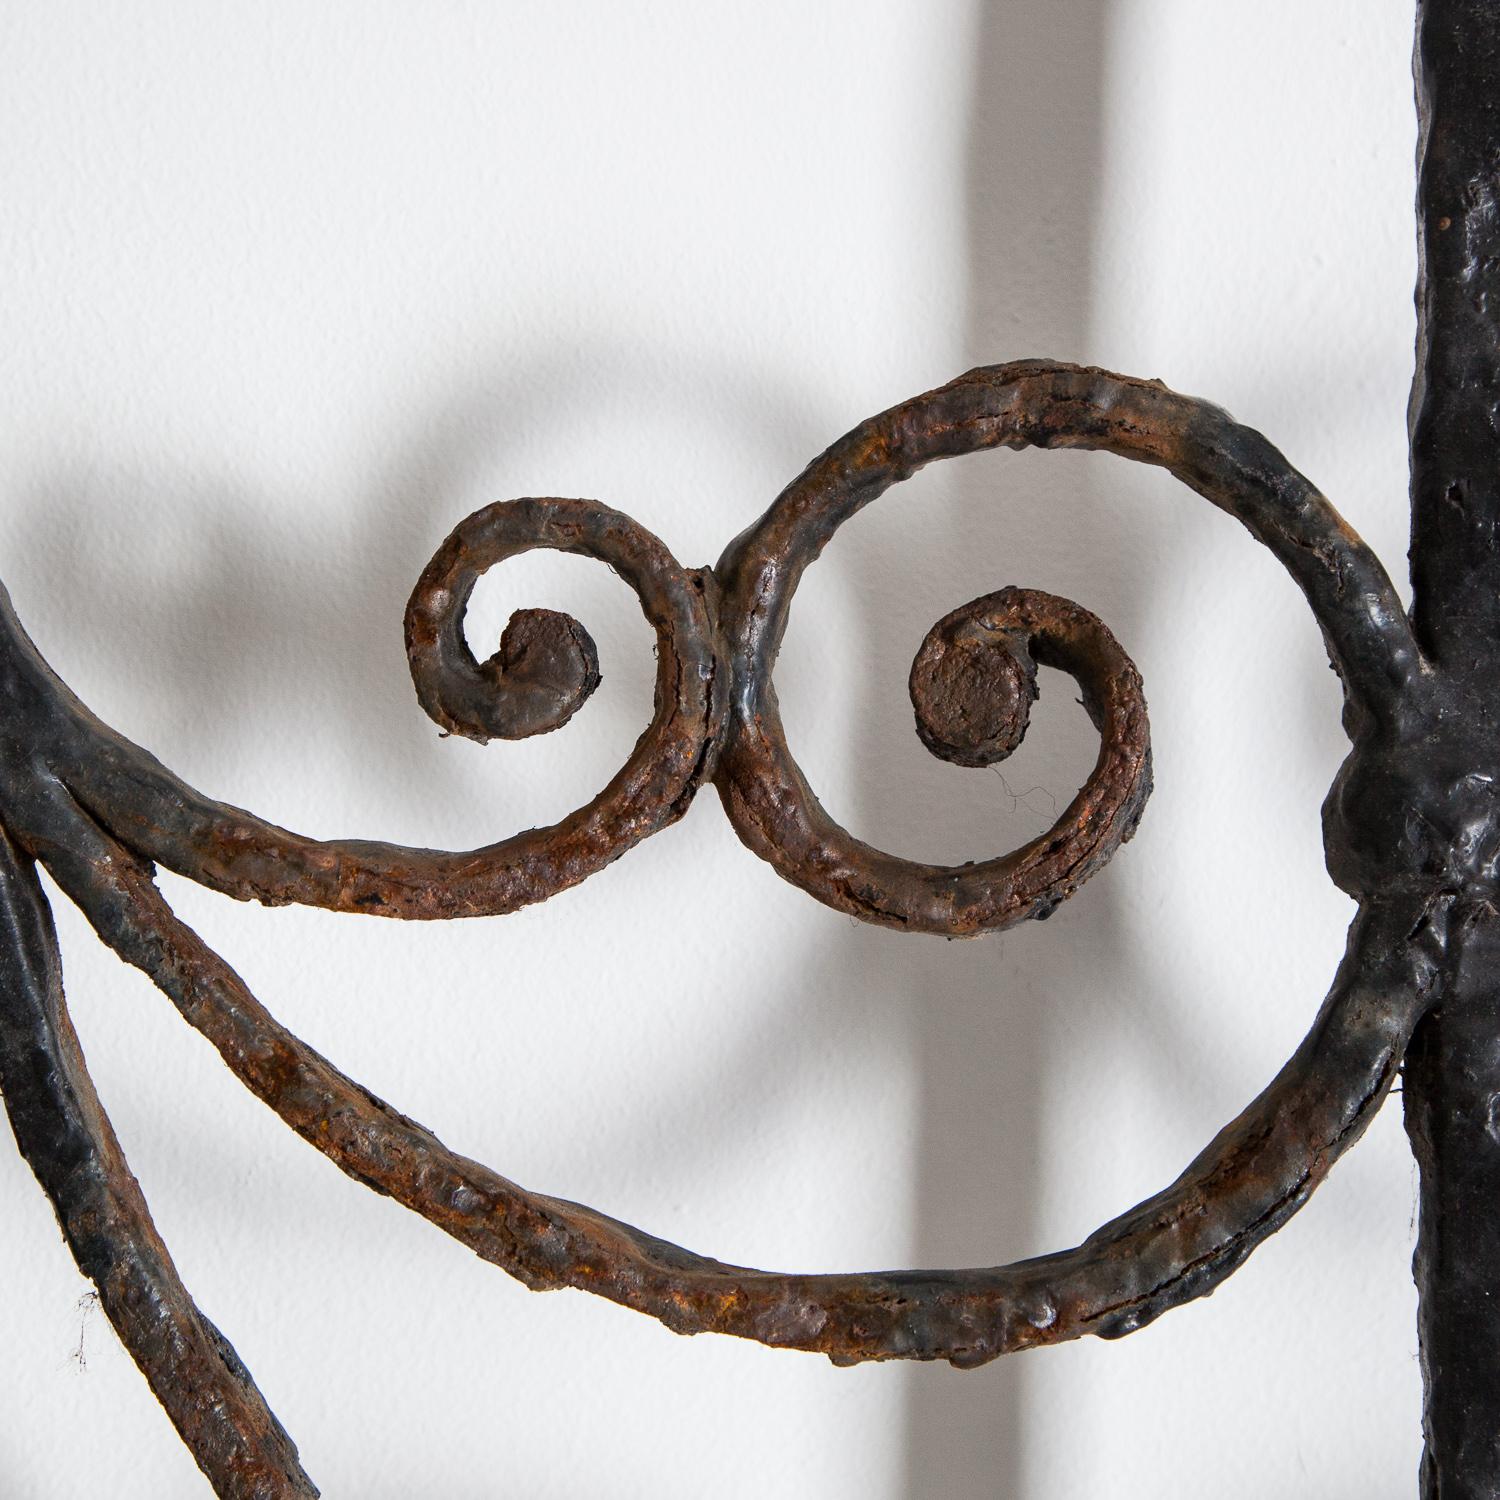 Splendid pair of wrought iron garden gates, circa 1820.

The gates have small modern addition to the side, which allow them to be hung if desired.
The door handle has seized over the years and is no longer functioning.

Each gate measures -